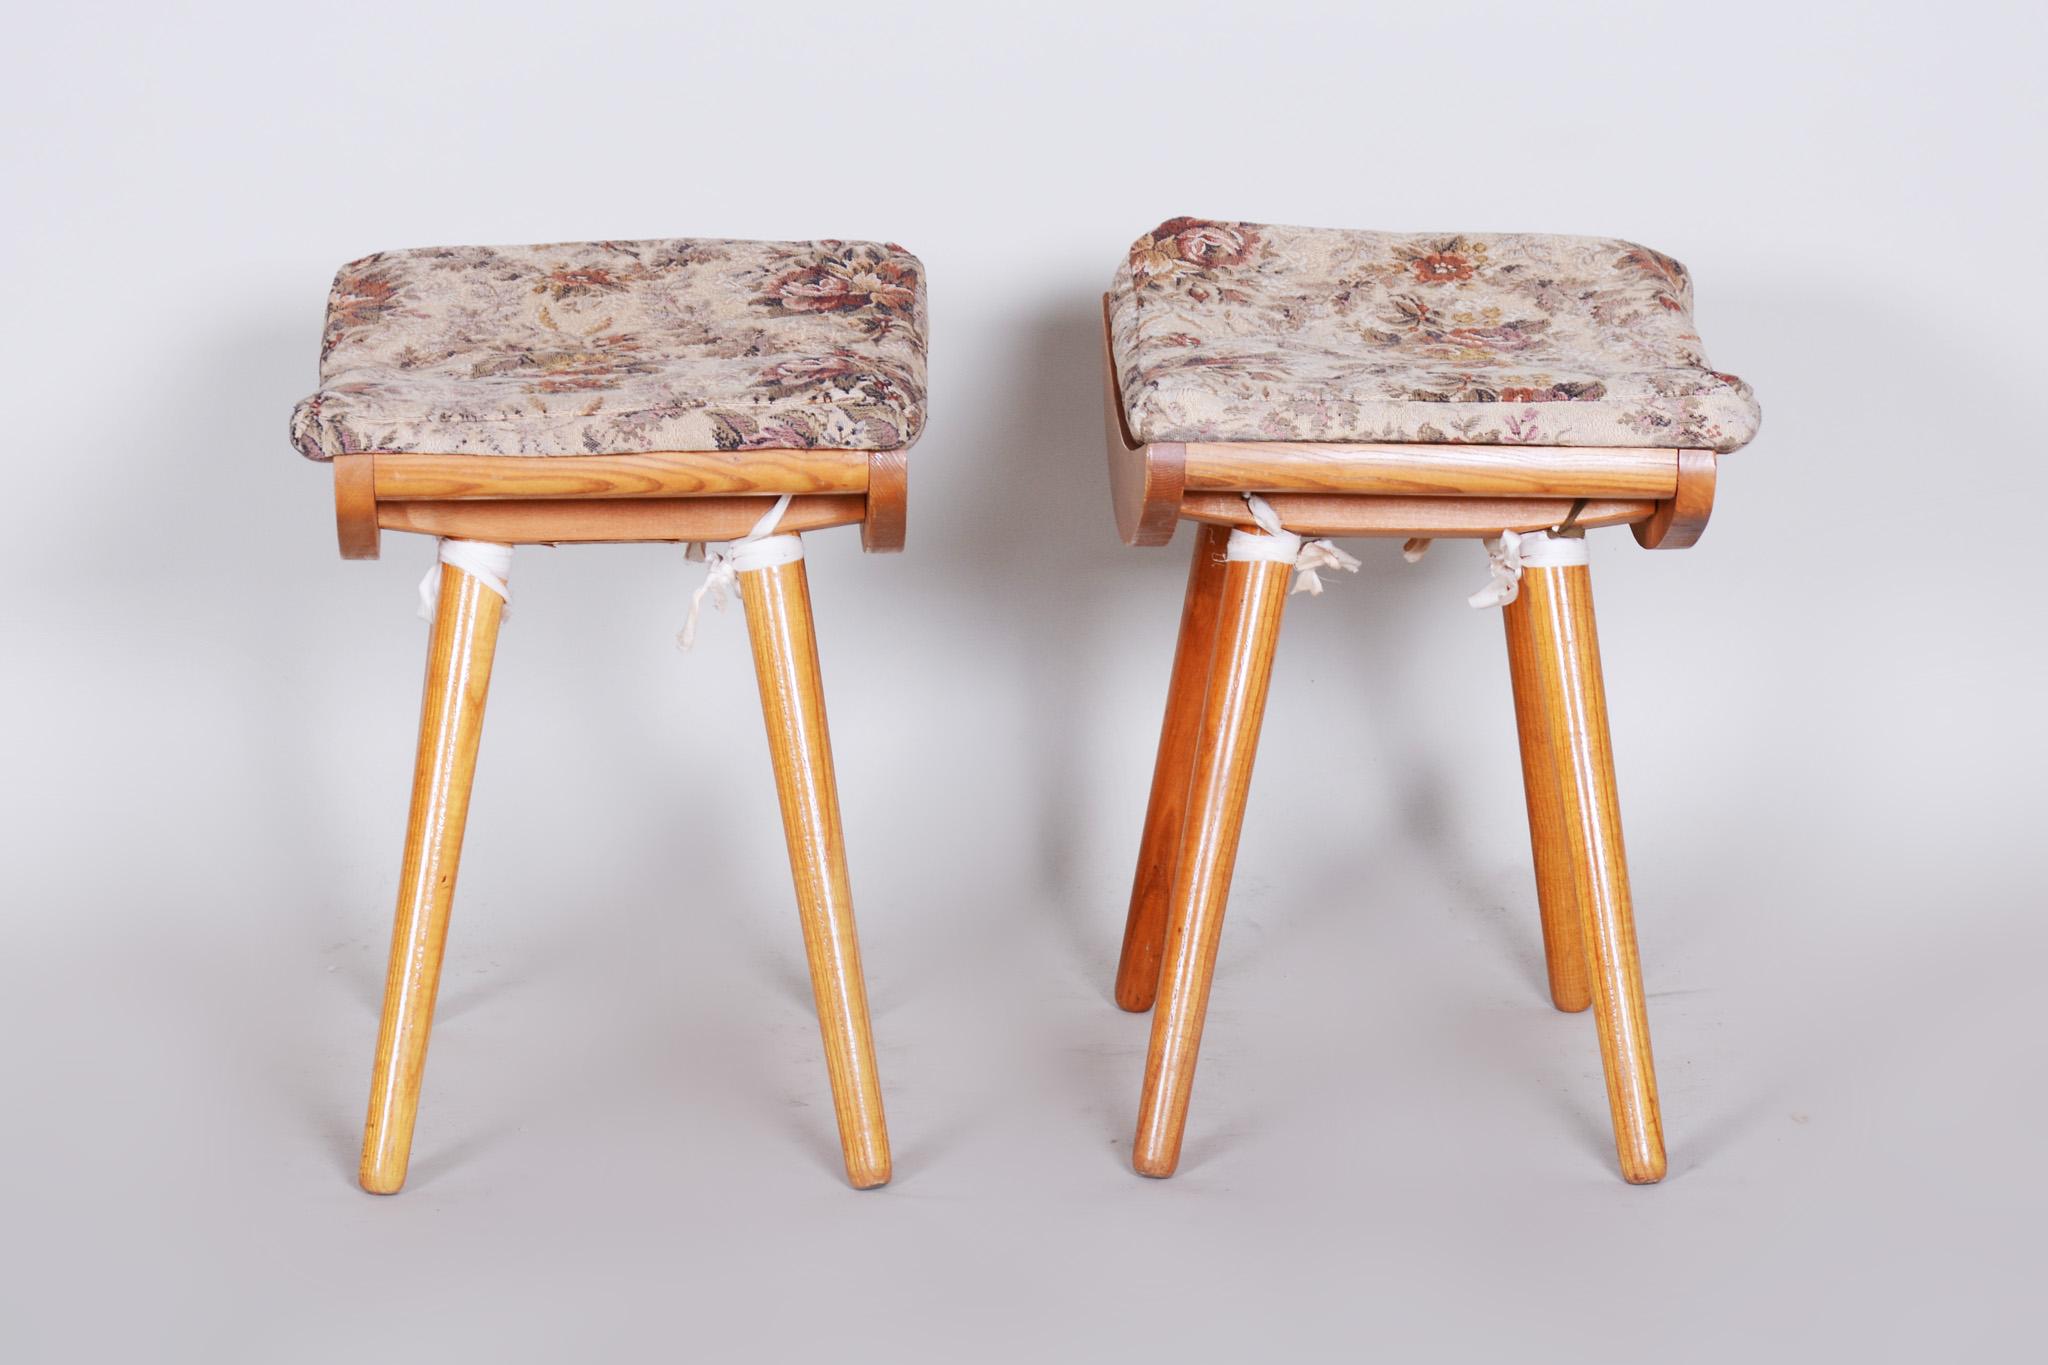 Pair of Midcentury Ash Stools, 1960s, Original Preserved Condition In Fair Condition For Sale In Horomerice, CZ